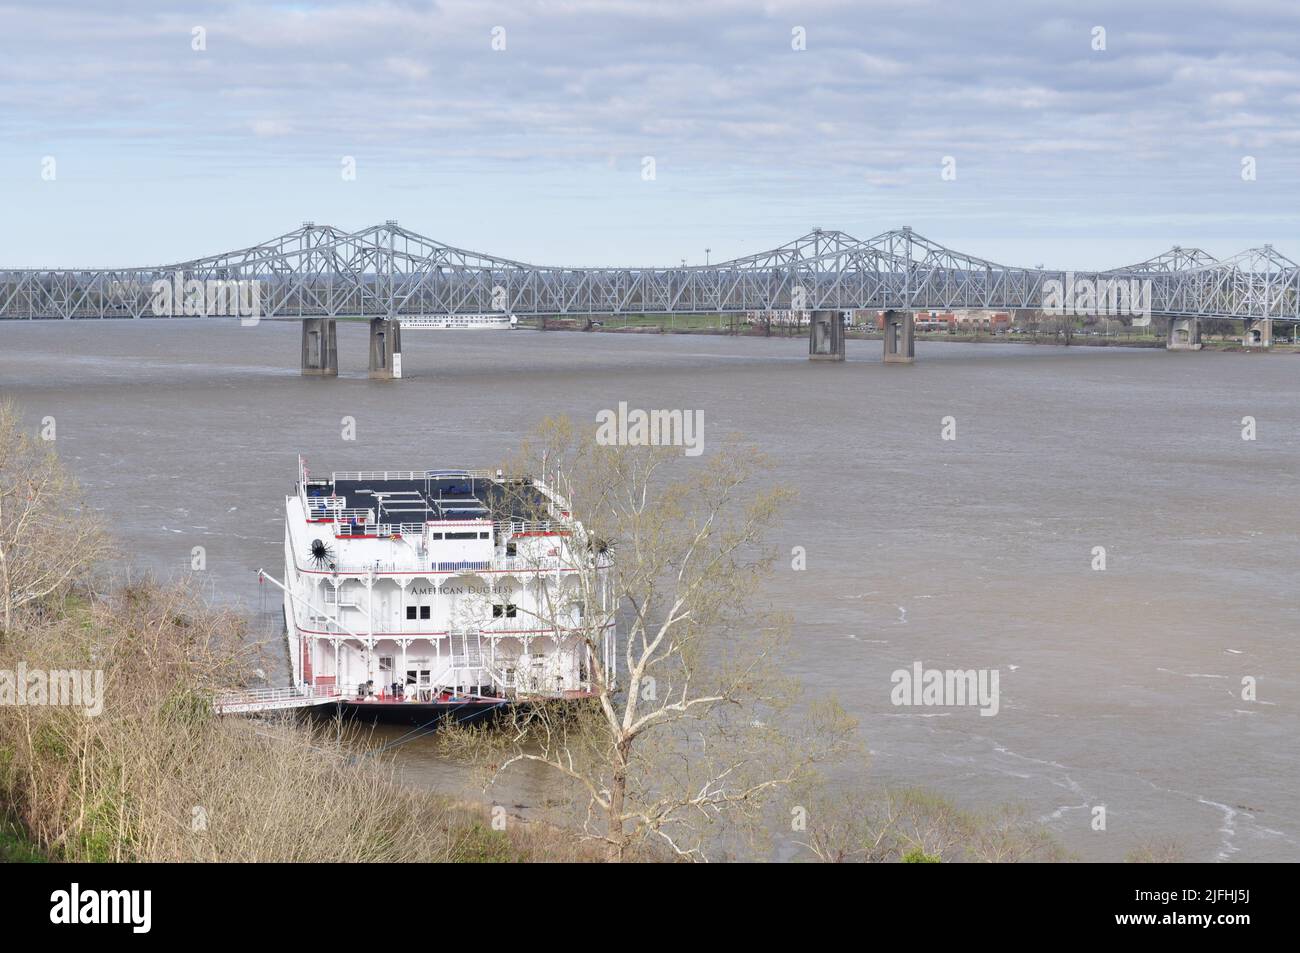 American Duchess paddle wheel river cruiser on the Mississippi River at Natchez, Mississippi, USA Stock Photo